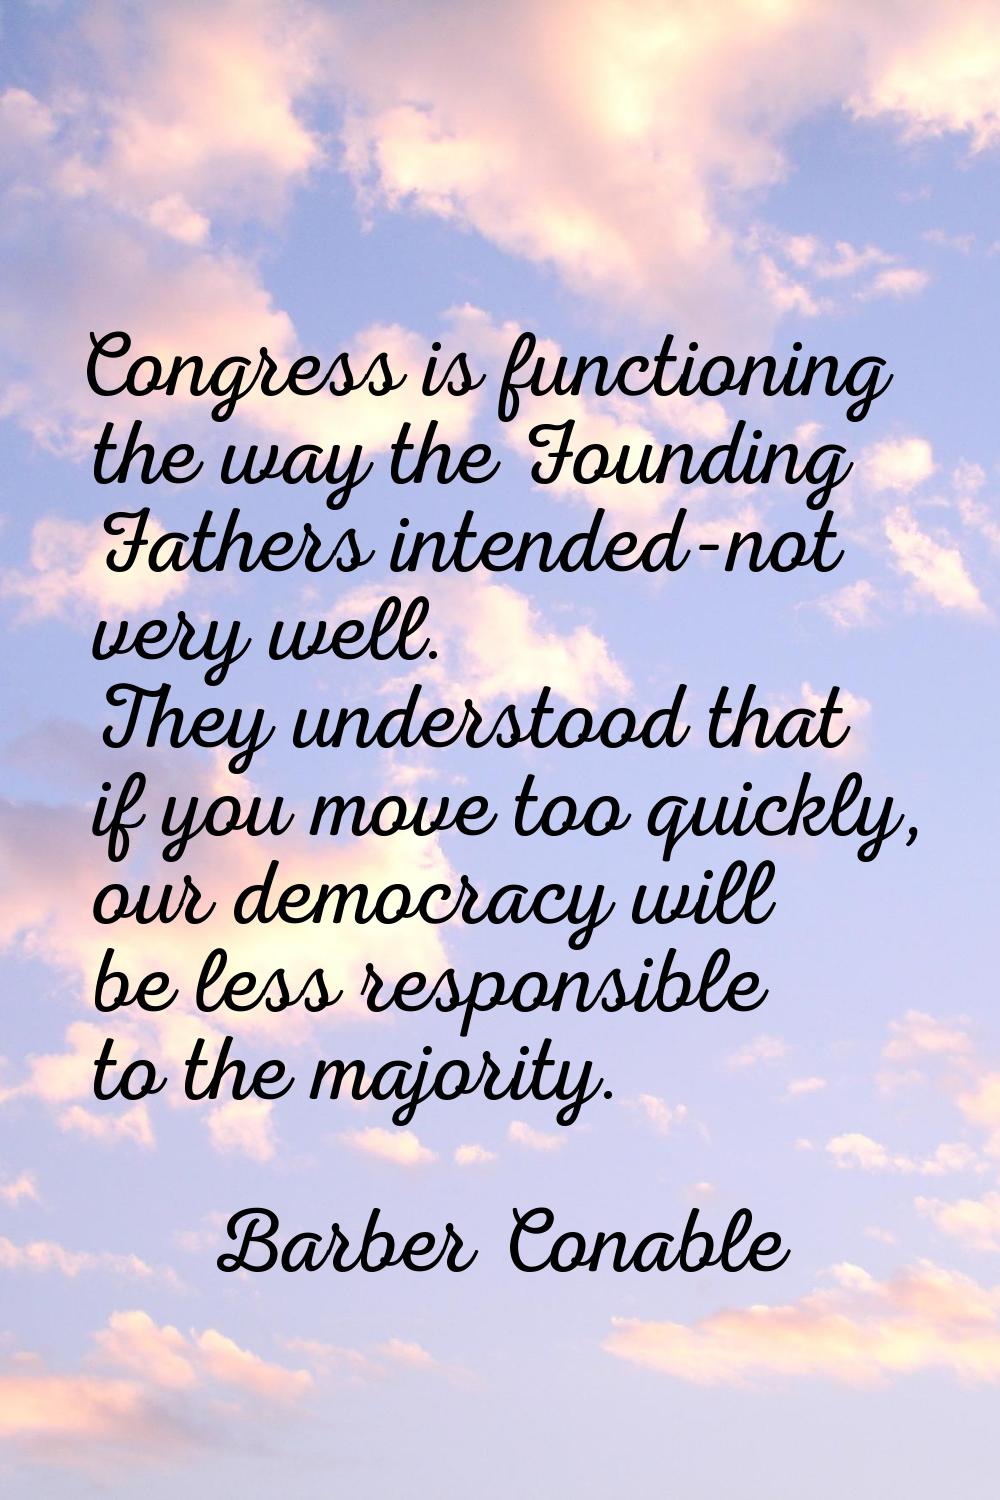 Congress is functioning the way the Founding Fathers intended-not very well. They understood that i